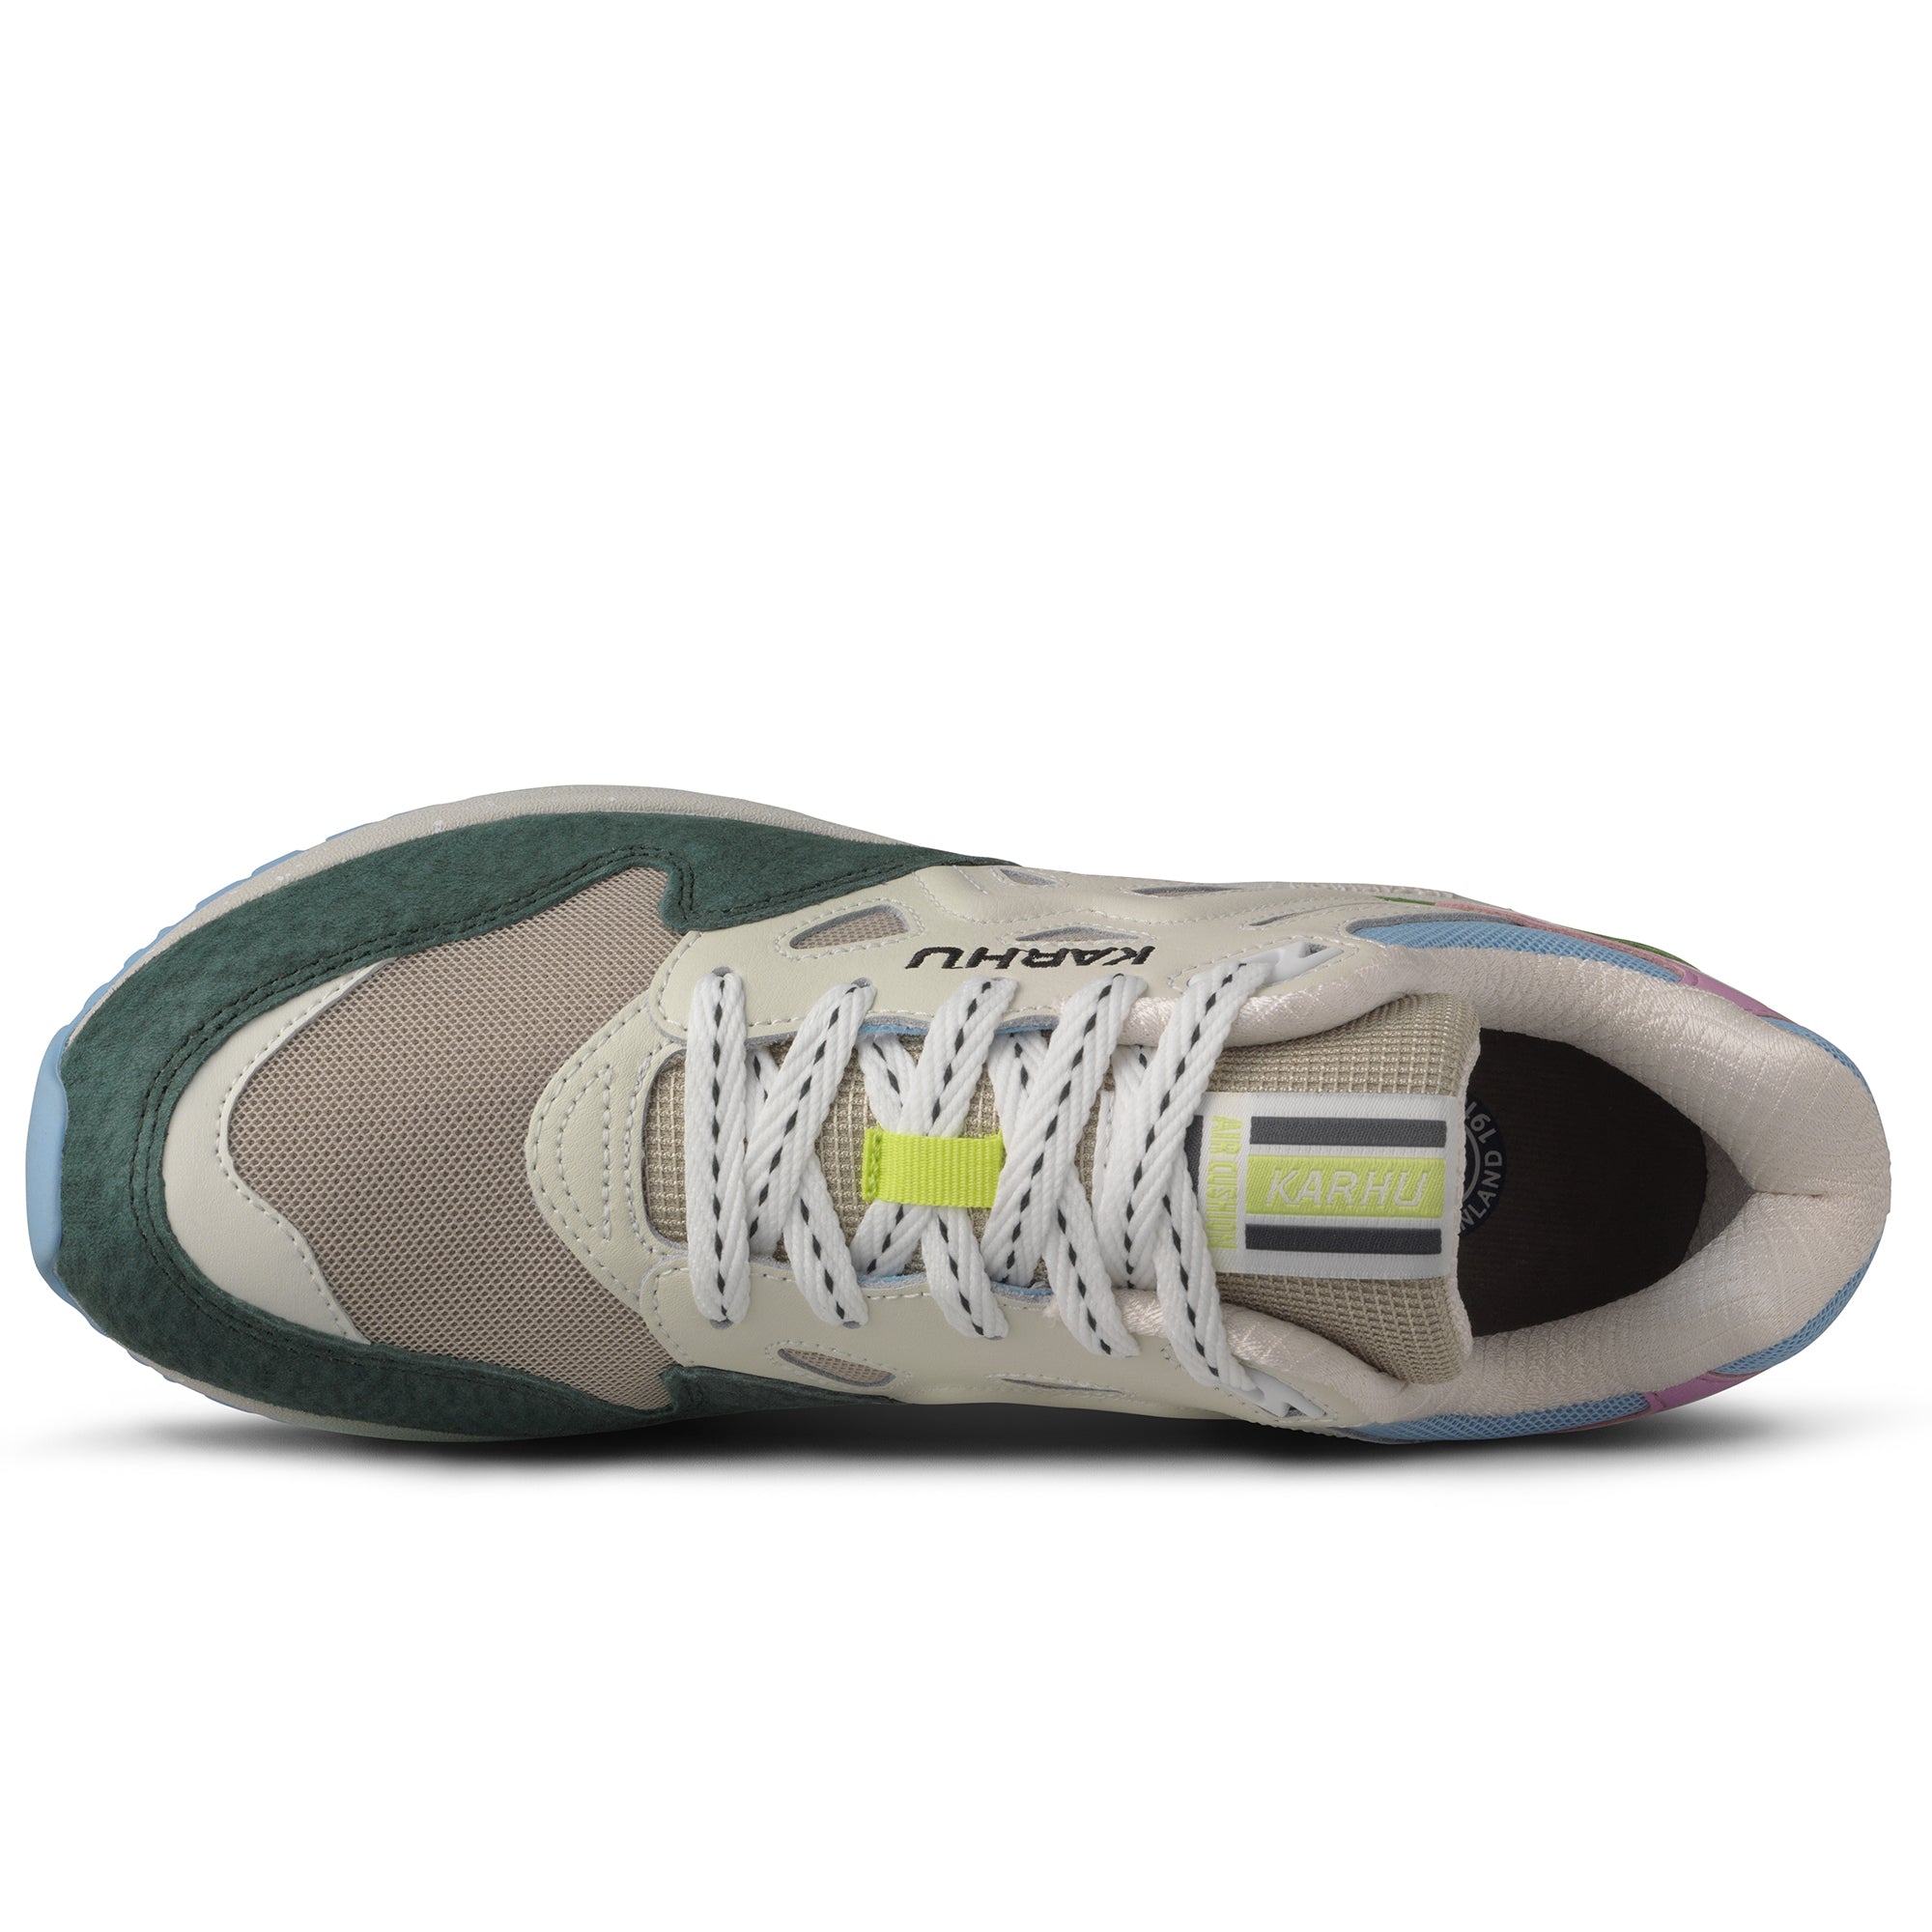 Karhu Legacy 96 Trainers - Piquant Green/Silver Lining